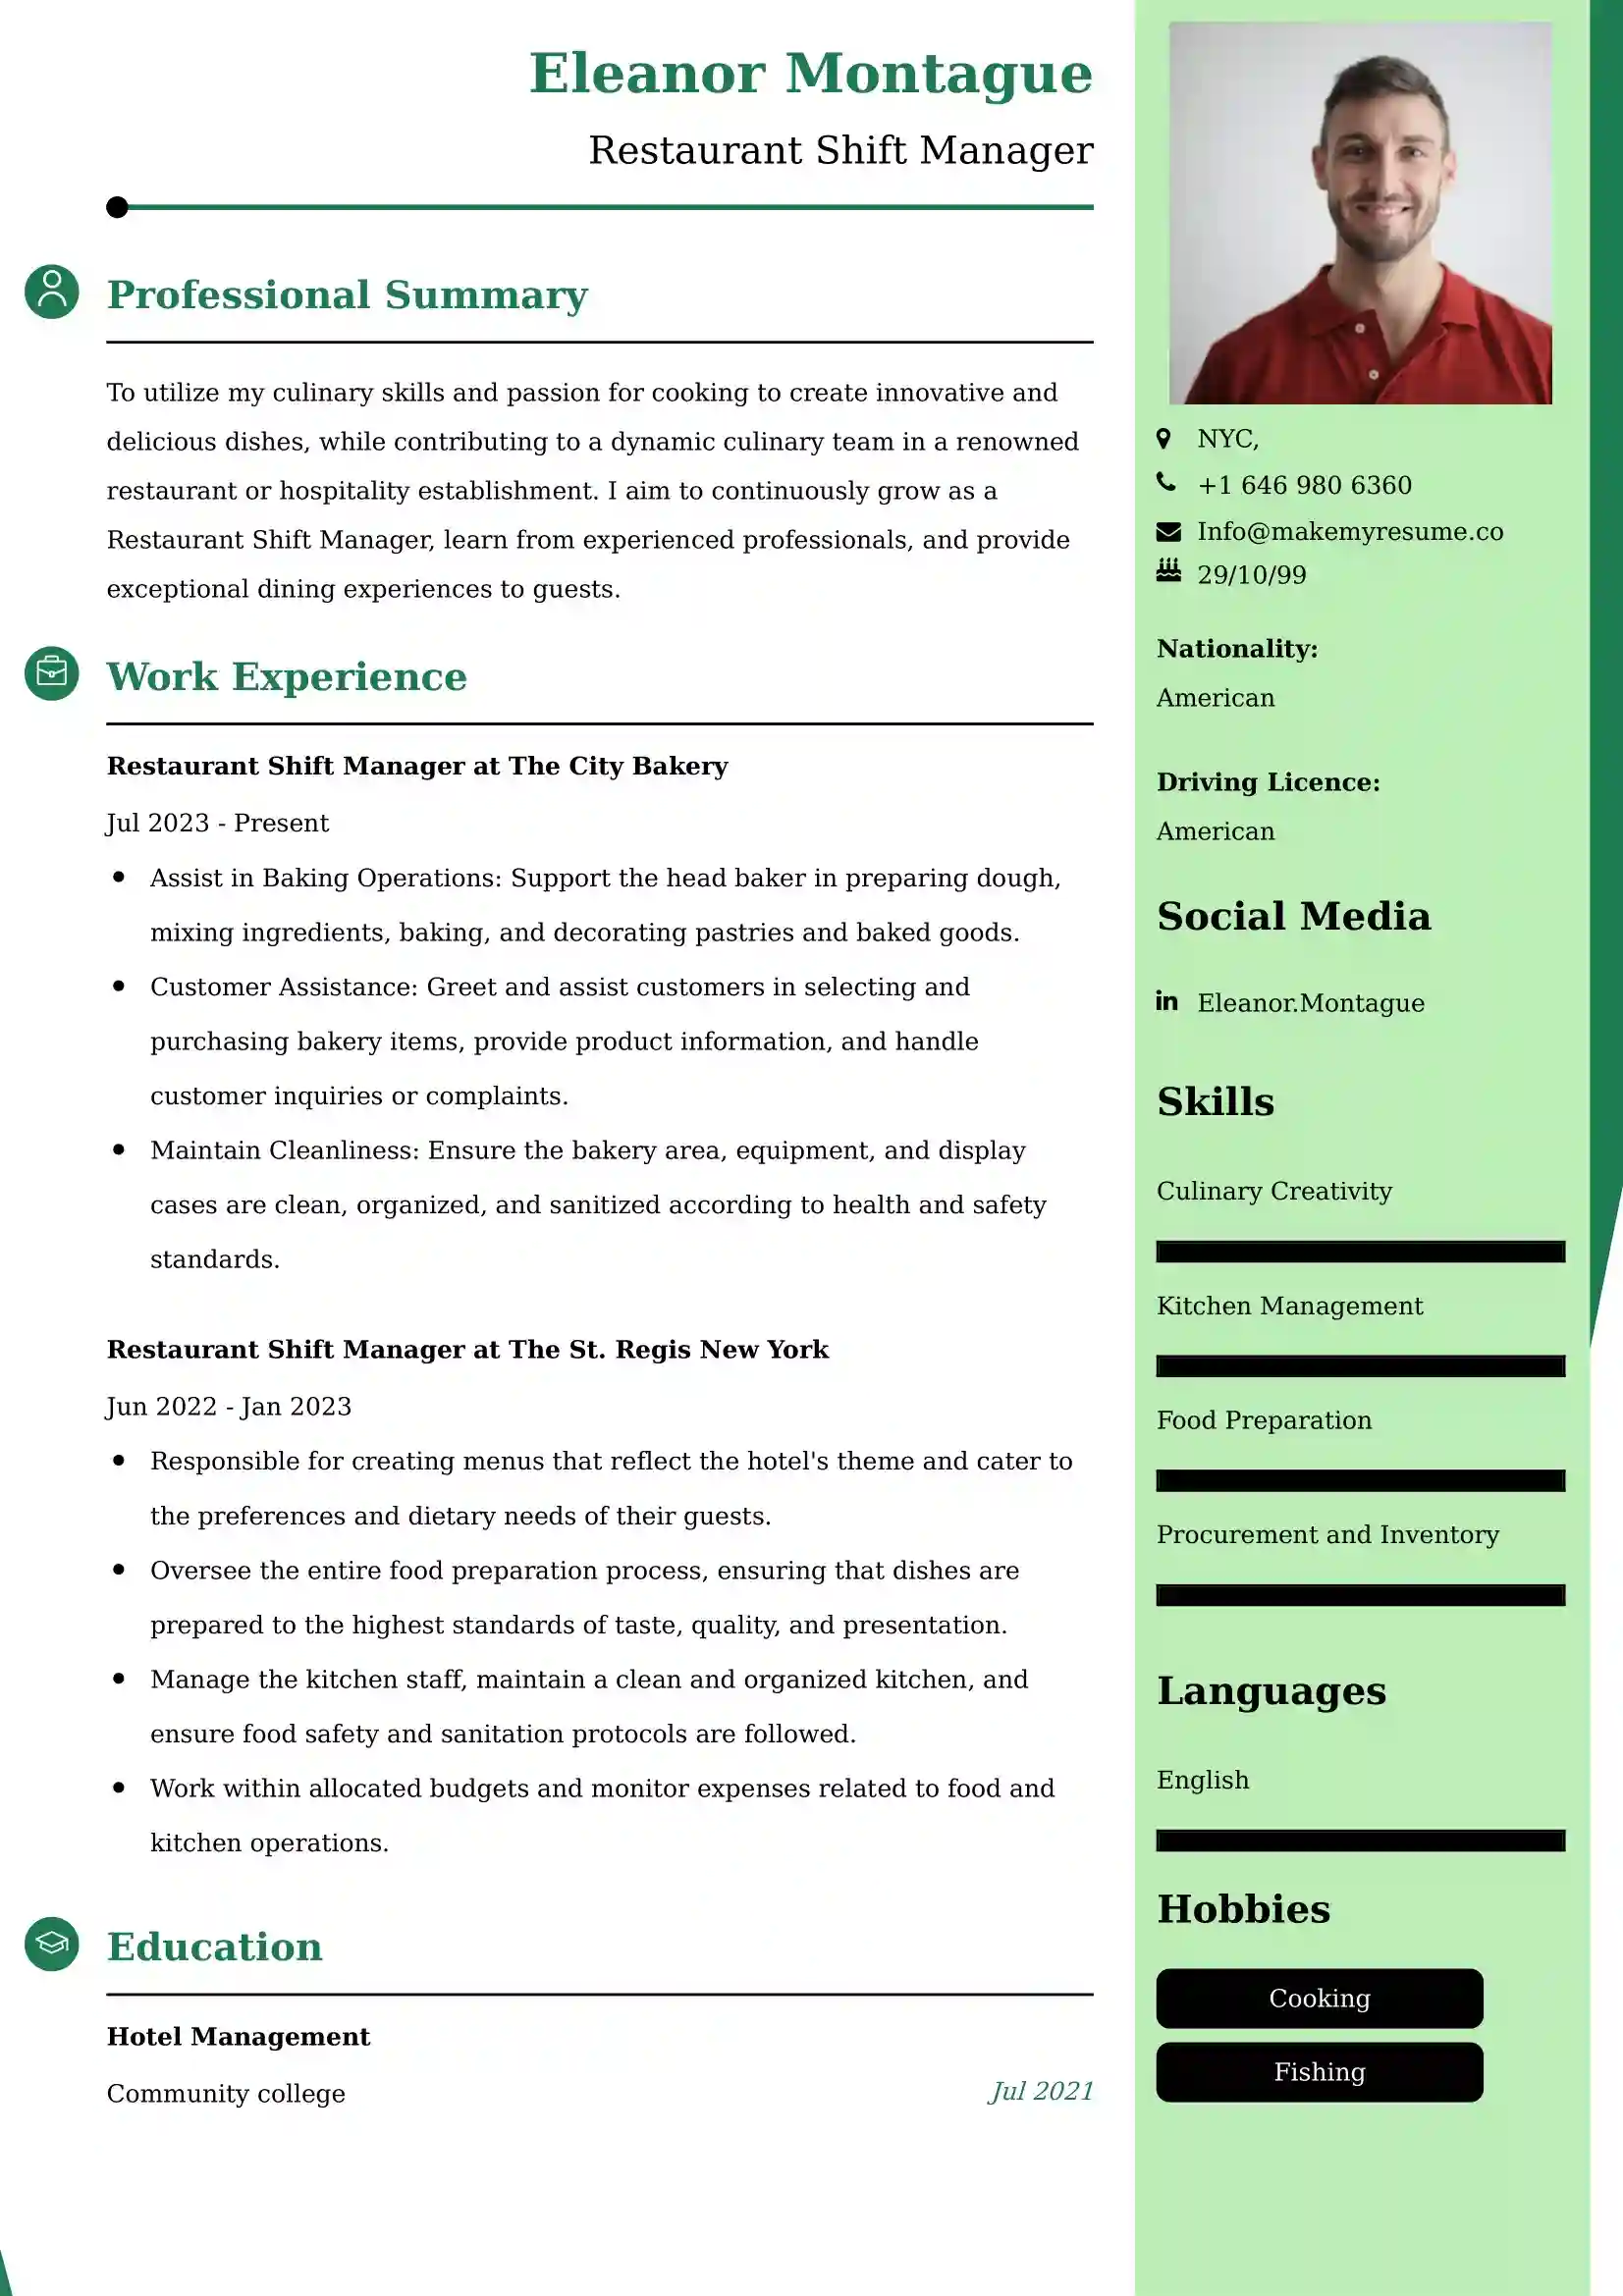 Restaurant Shift Manager Resume Examples for UK Jobs - Tips and Guide